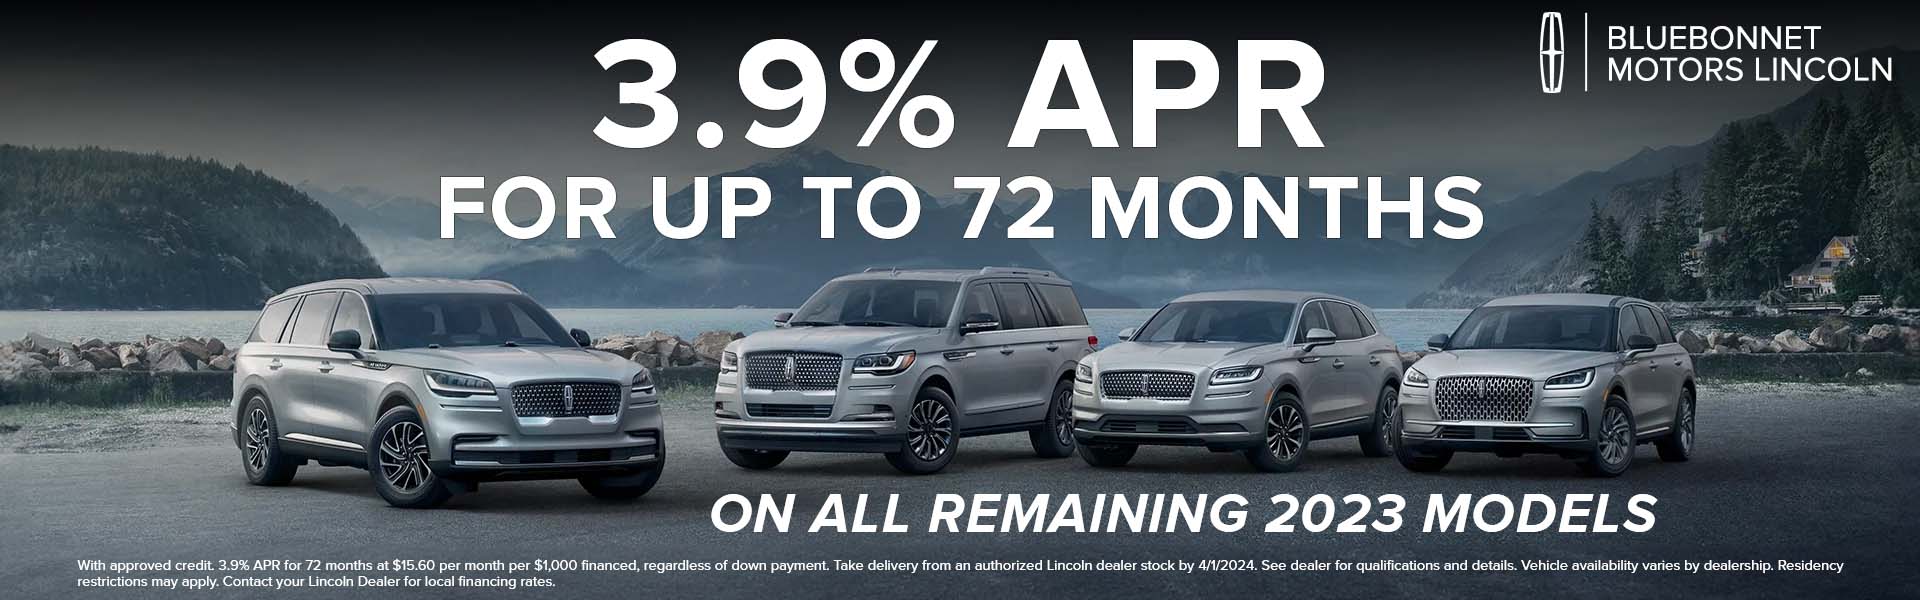 3.9% APR for 72 months available on 2023 Lincoln models